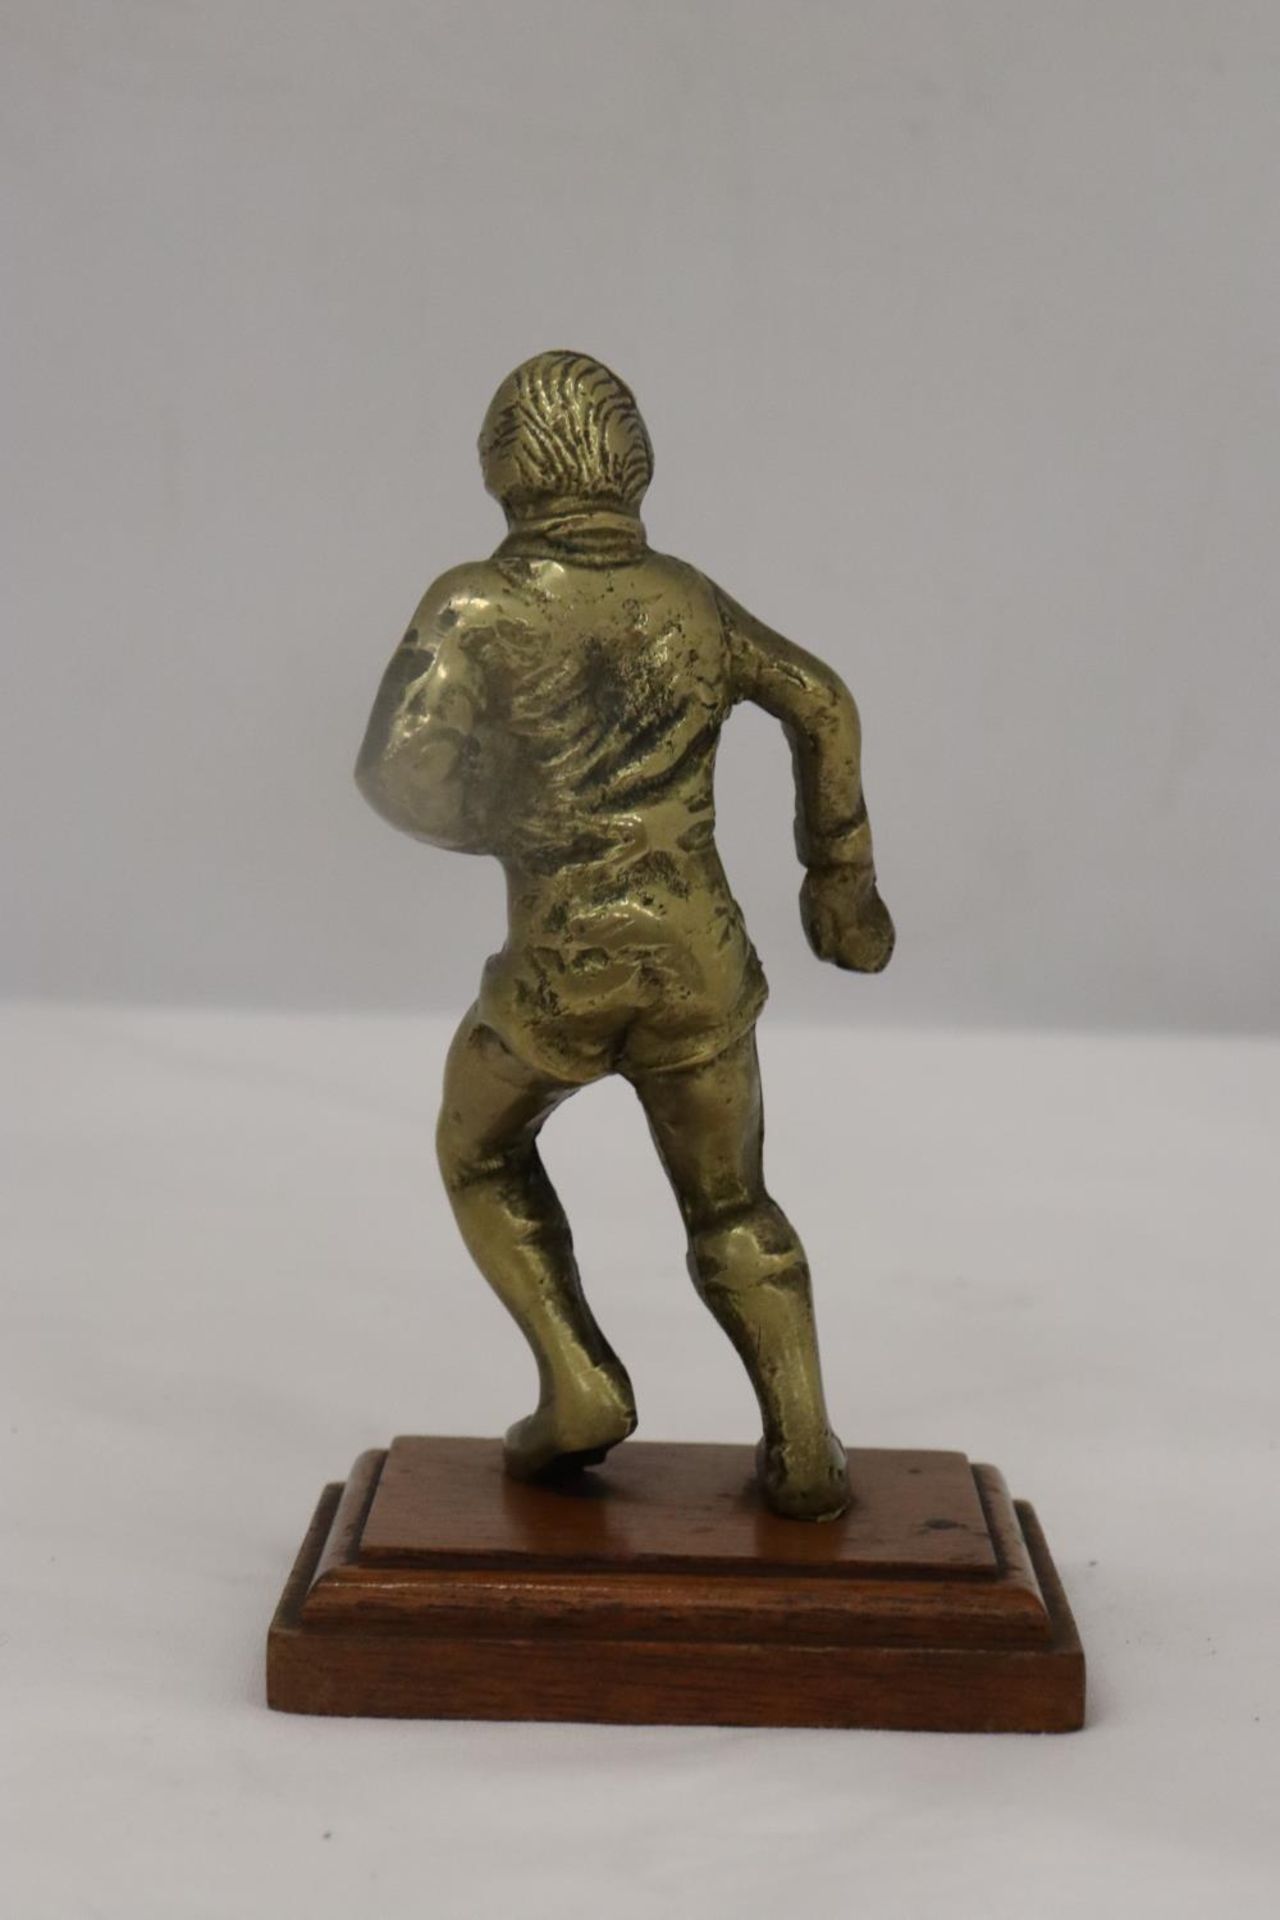 A VINTAGE BRASS RUGBY PLAYER ON A WOODEN PLINTH - Image 3 of 5